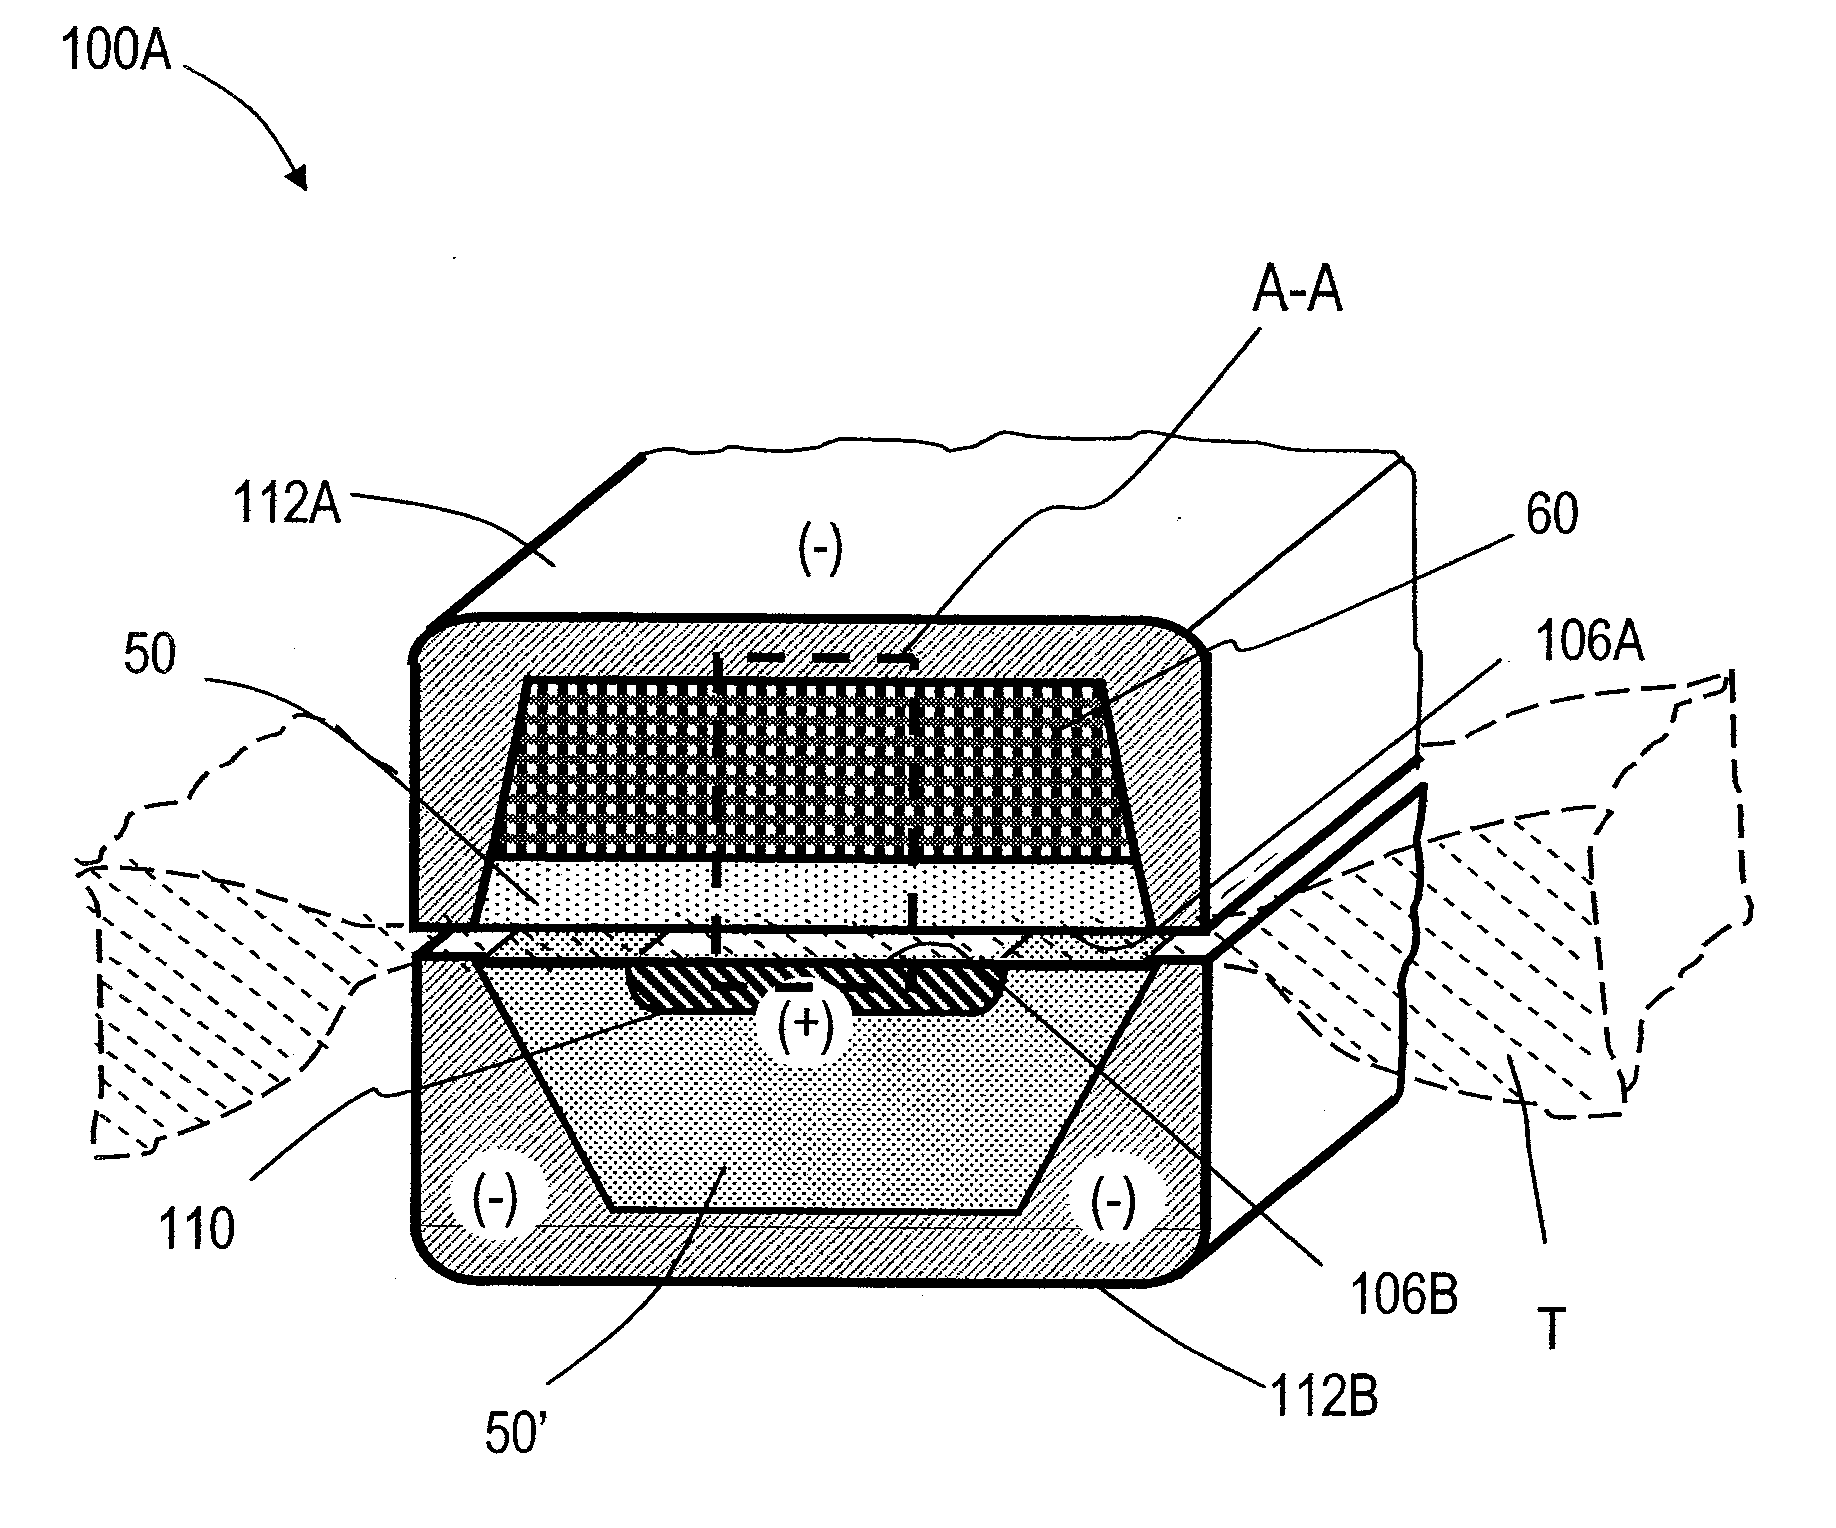 Surgical sealing surfaces and methods of use